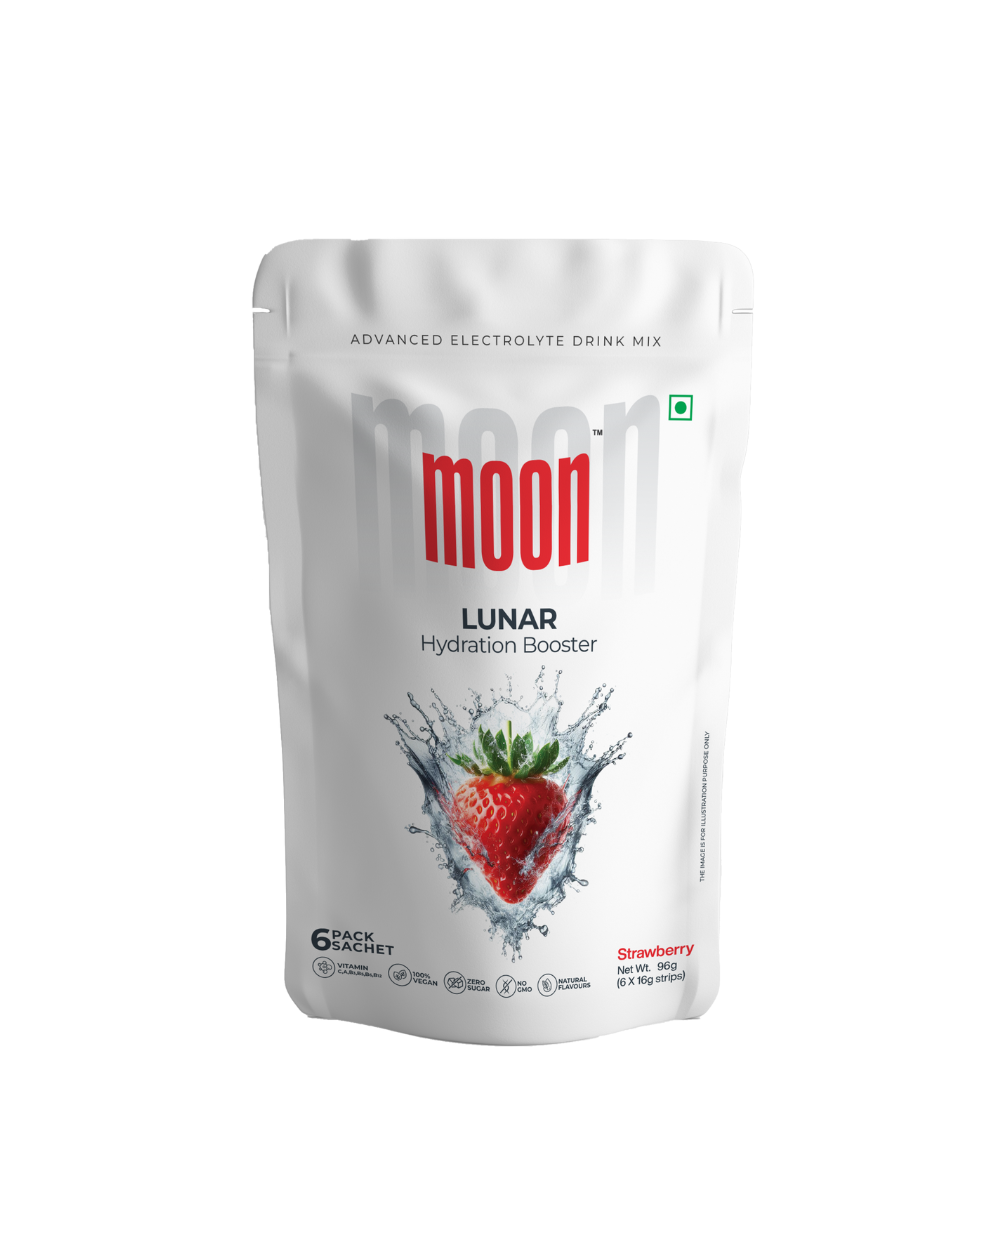 Product description: A bag of Moon Strawberry Lunar Hydration Booster on a white background with keywords.